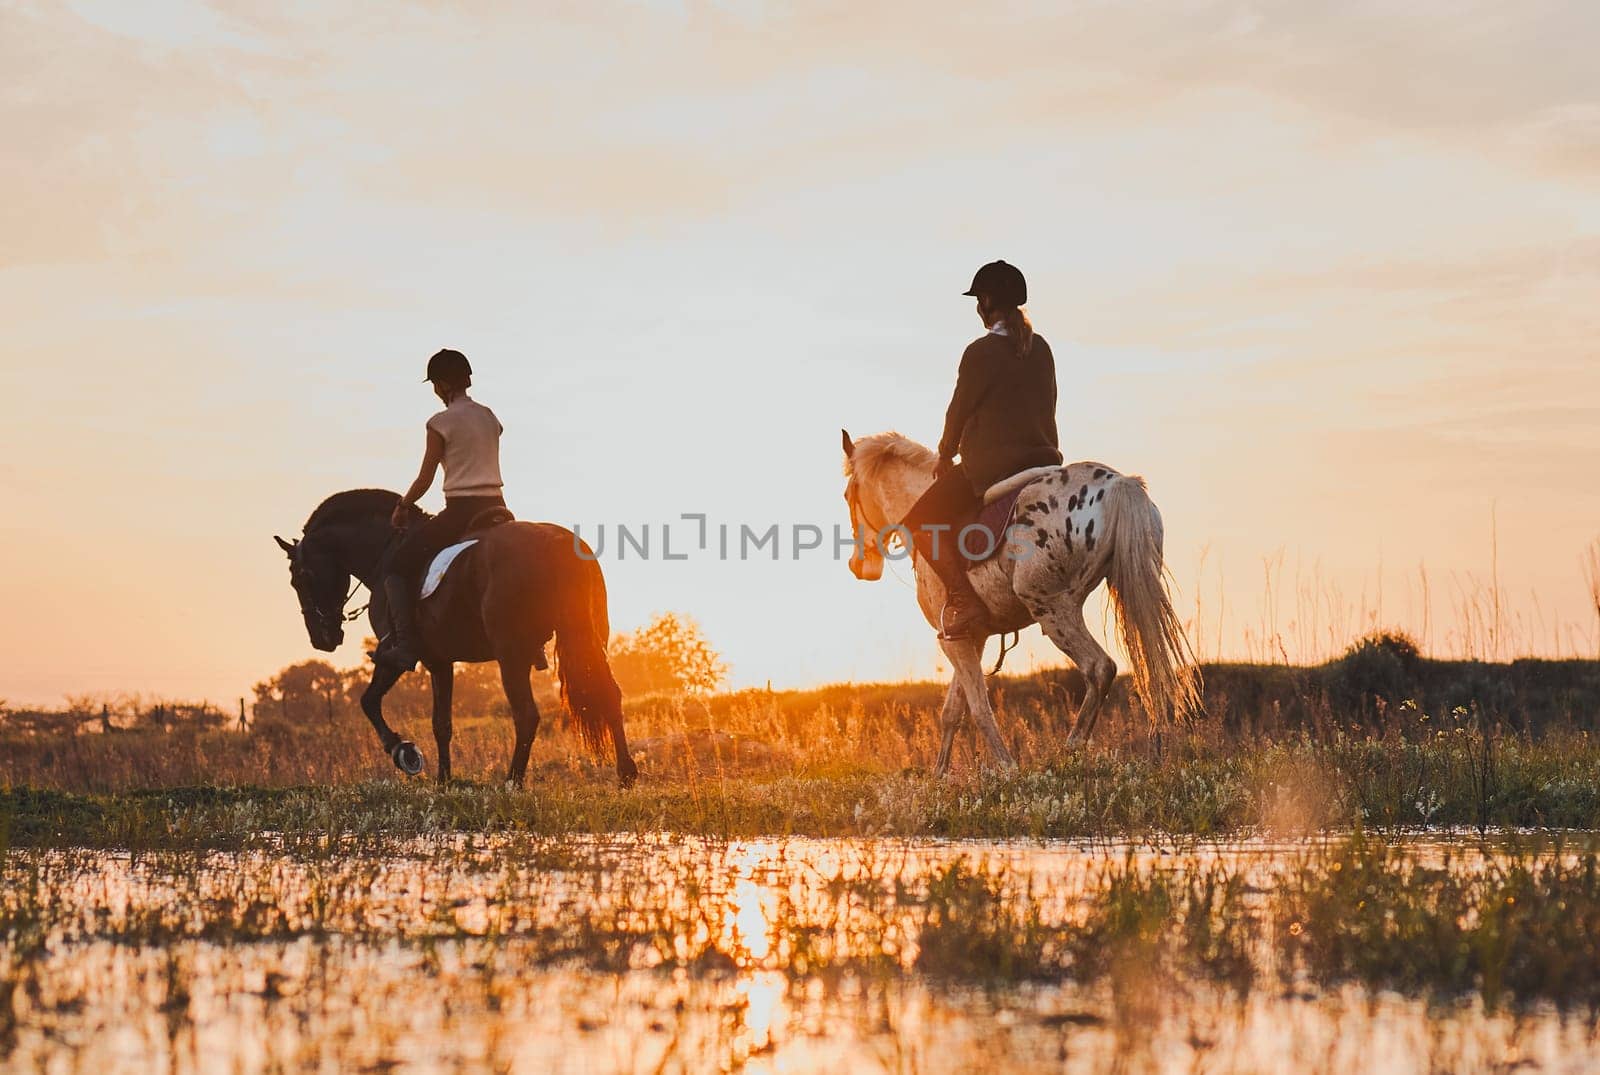 Horseback, women and friends by lake in countryside at sunset with outdoor mockup space. Equestrian, girls and animals in water, nature and adventure to travel, journey or summer vacation together.